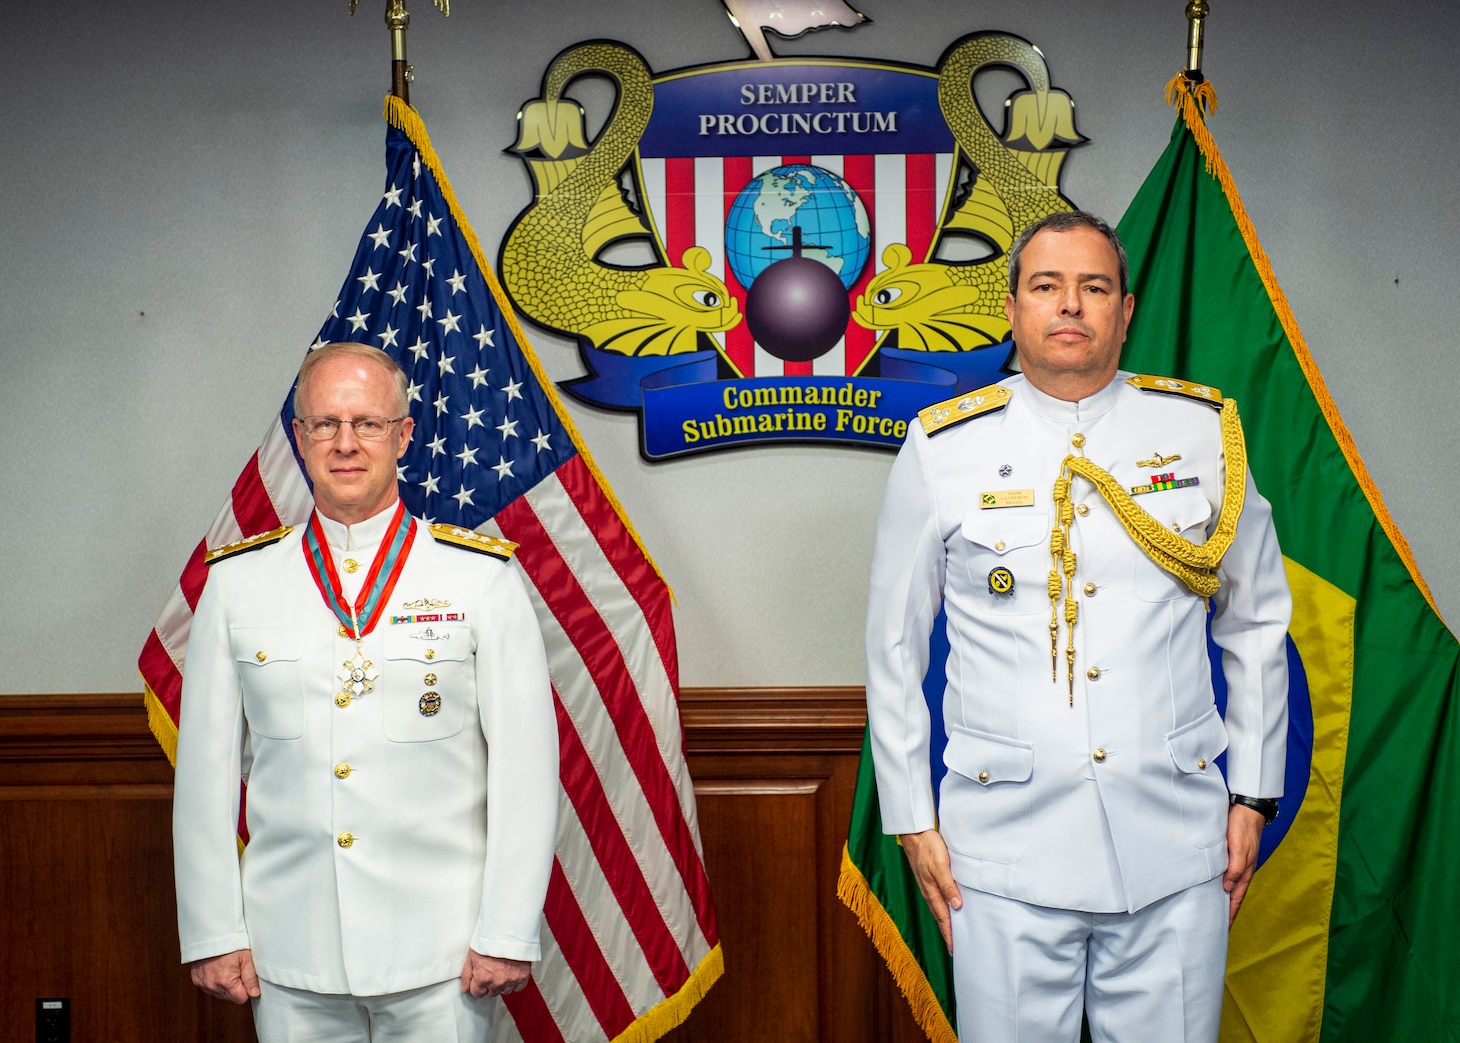 Vice Adm. Daryl Caudle, commander, U.S. Submarine Forces (SUBFOR), left, and Vice Adm. Amaury Calheiros, Brazilian Naval Attaché, participate in an award ceremony at SUBFOR Headquarters, June 14, 2021.